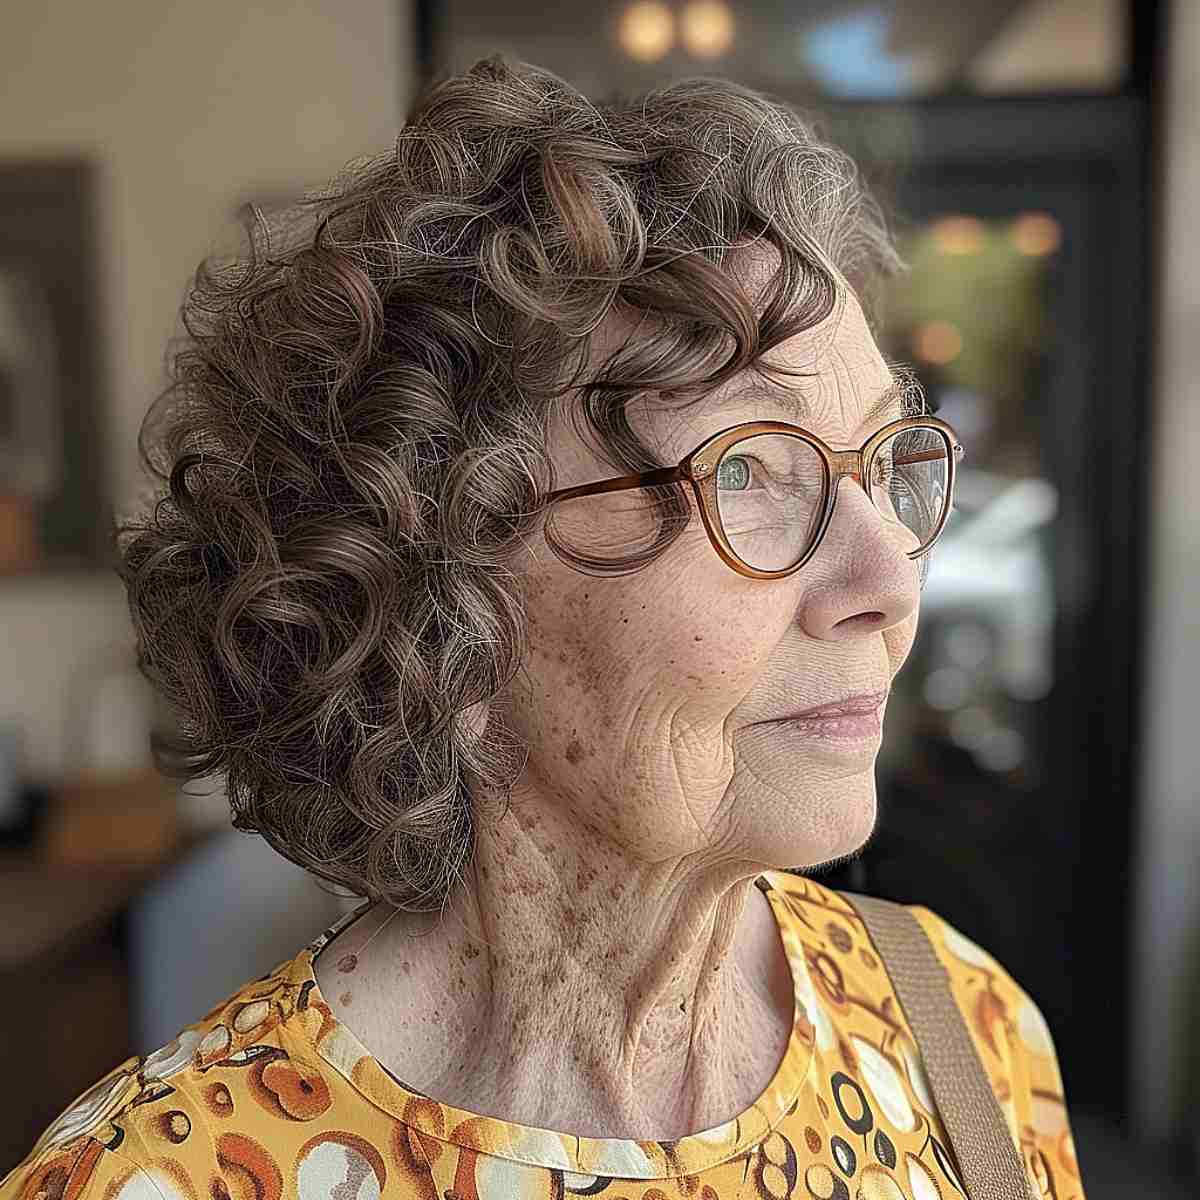 Curly Bob for Curly Hair for women passed 60 with Glasses